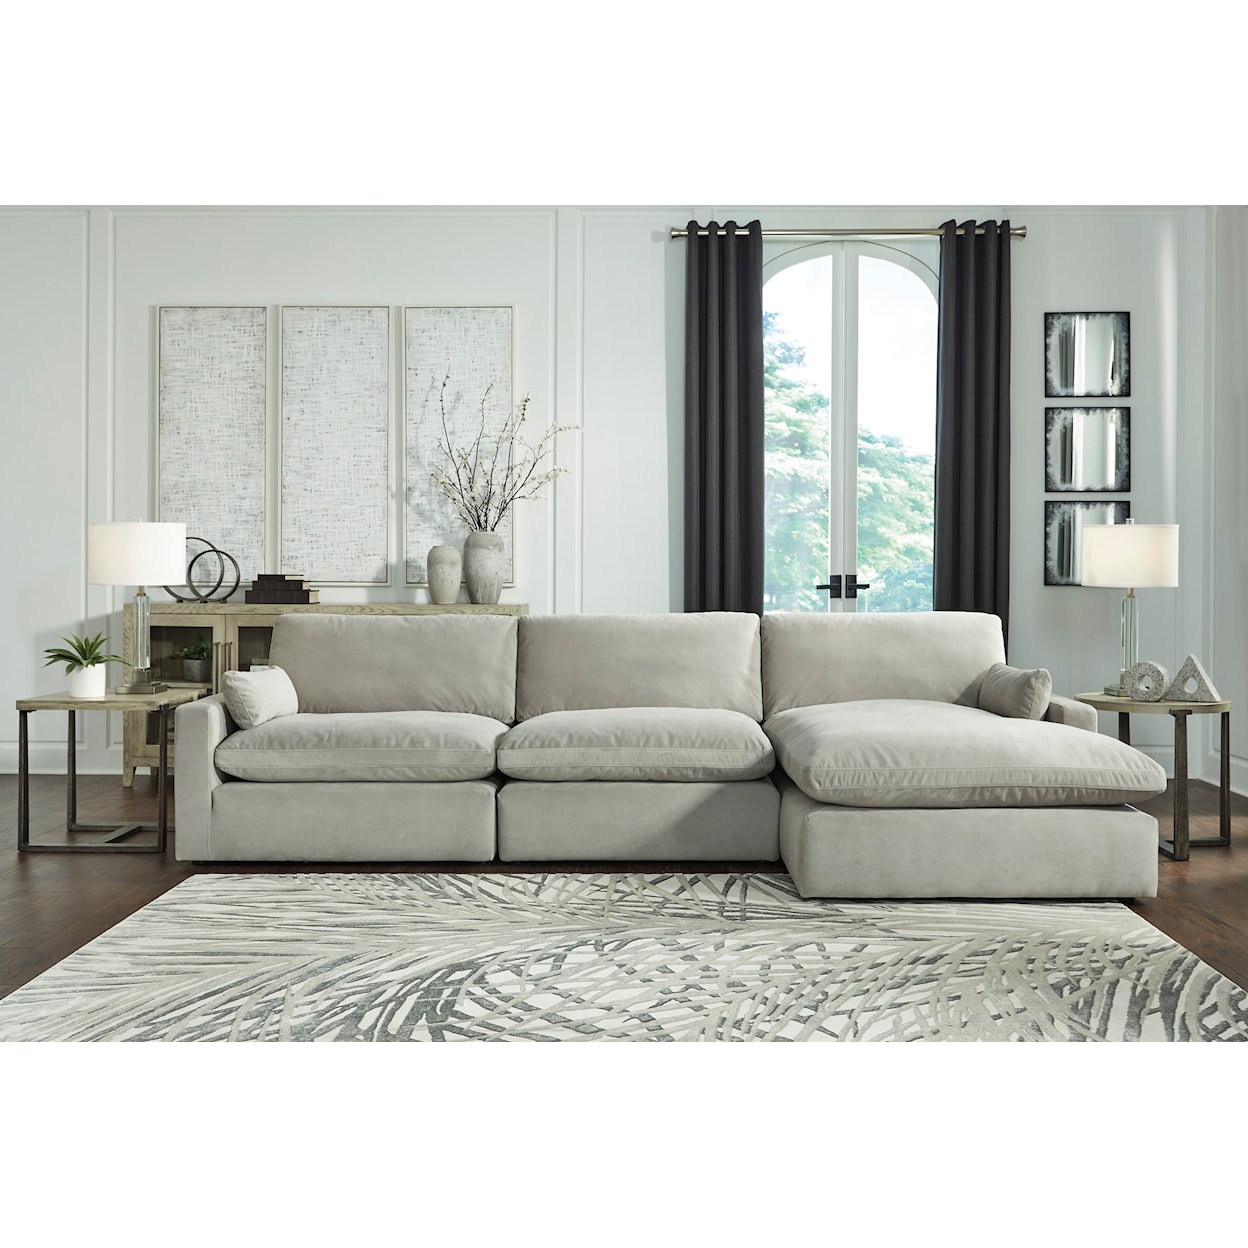 Signature Design Sophie 3-Piece Sectional with Chaise